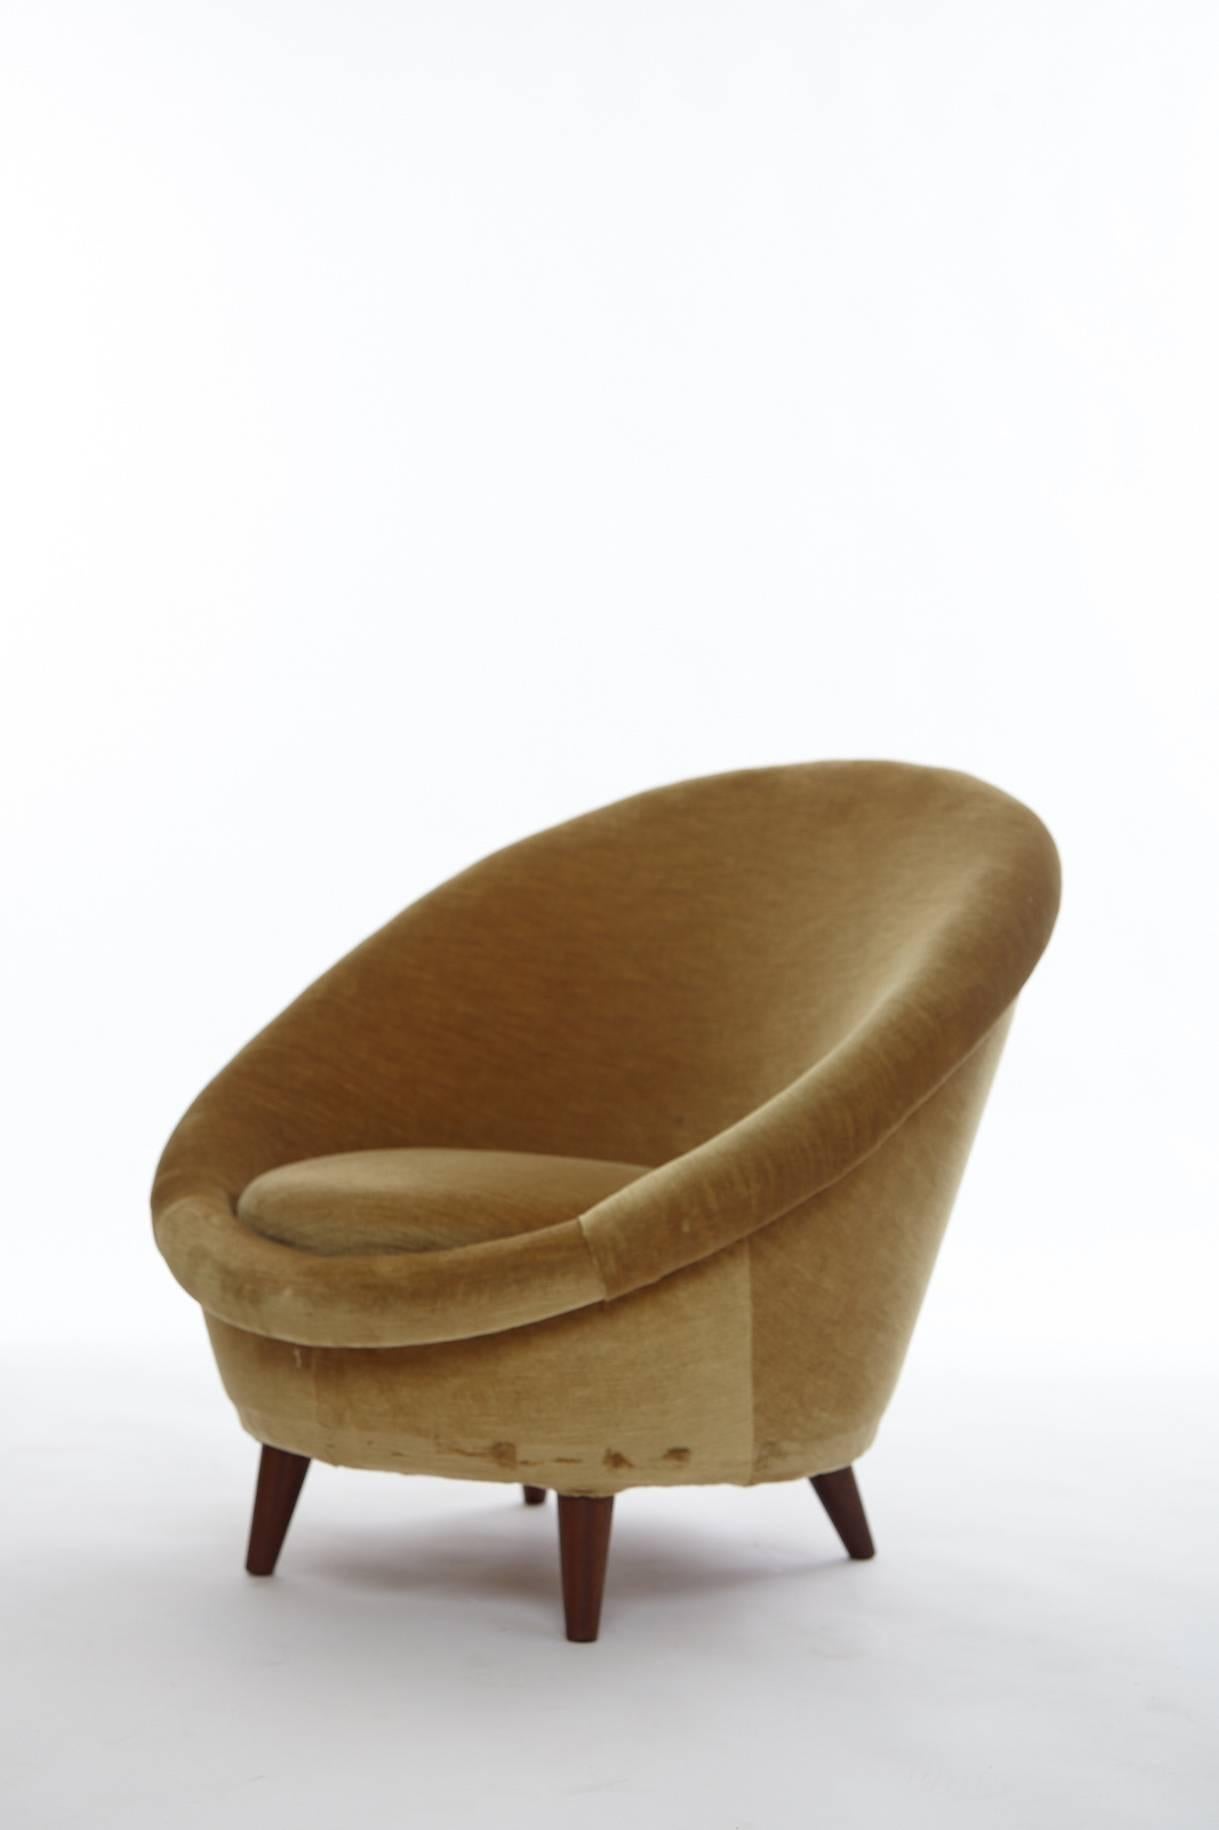 Rare 1950s Norwegian egg chair, upholstered in velvet. Fabric shows some wear and marks. Re-upholstery available upon request at an extra charge.